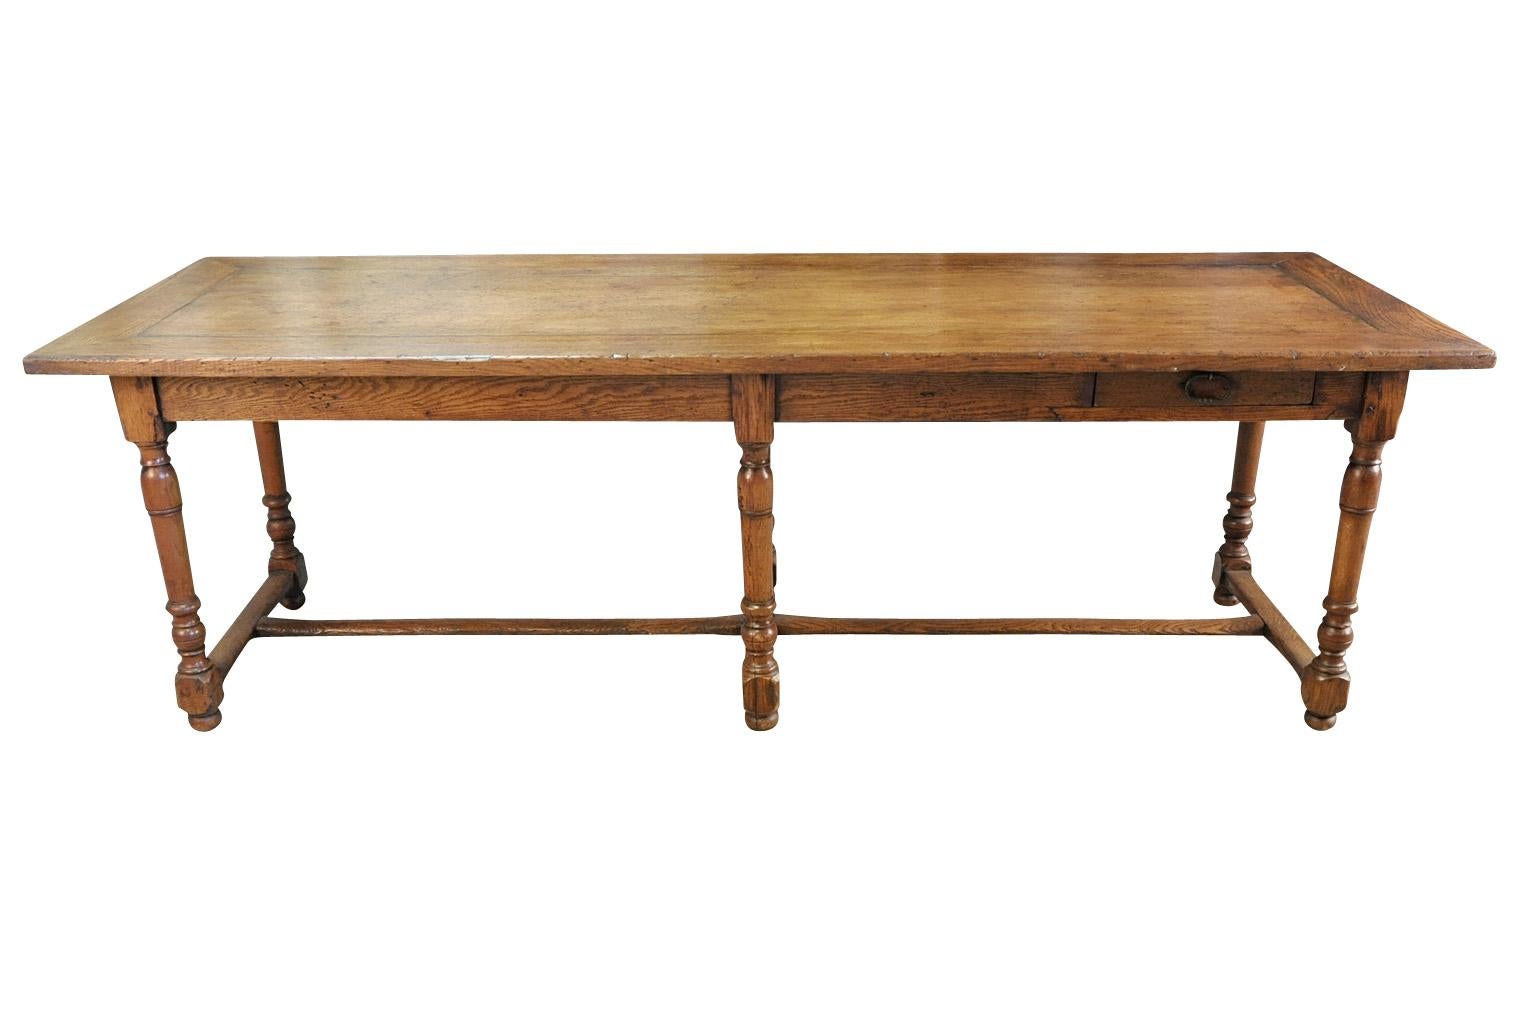 A very beautiful later 19th century draper's table from the South of France. Constructed from beautifully patinated oak with two drawers.